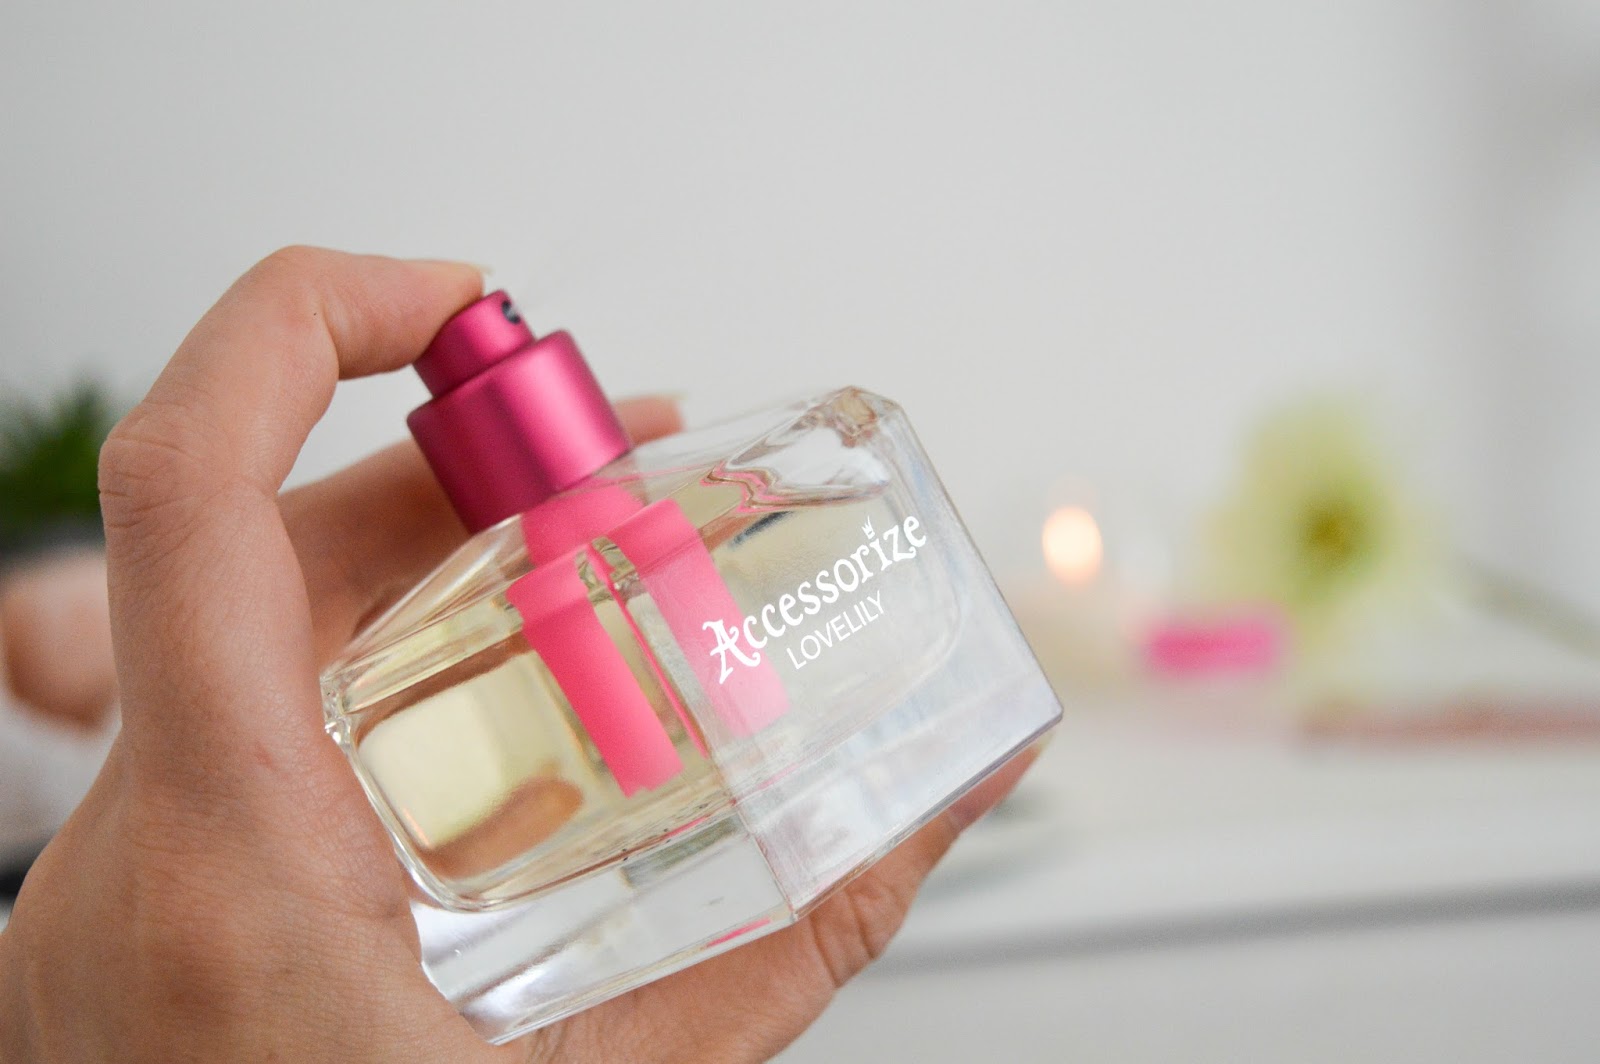 Accessorize Lovelily Perfume, Accessorize perfume, should I wear perfume to a job interview, beauty blog